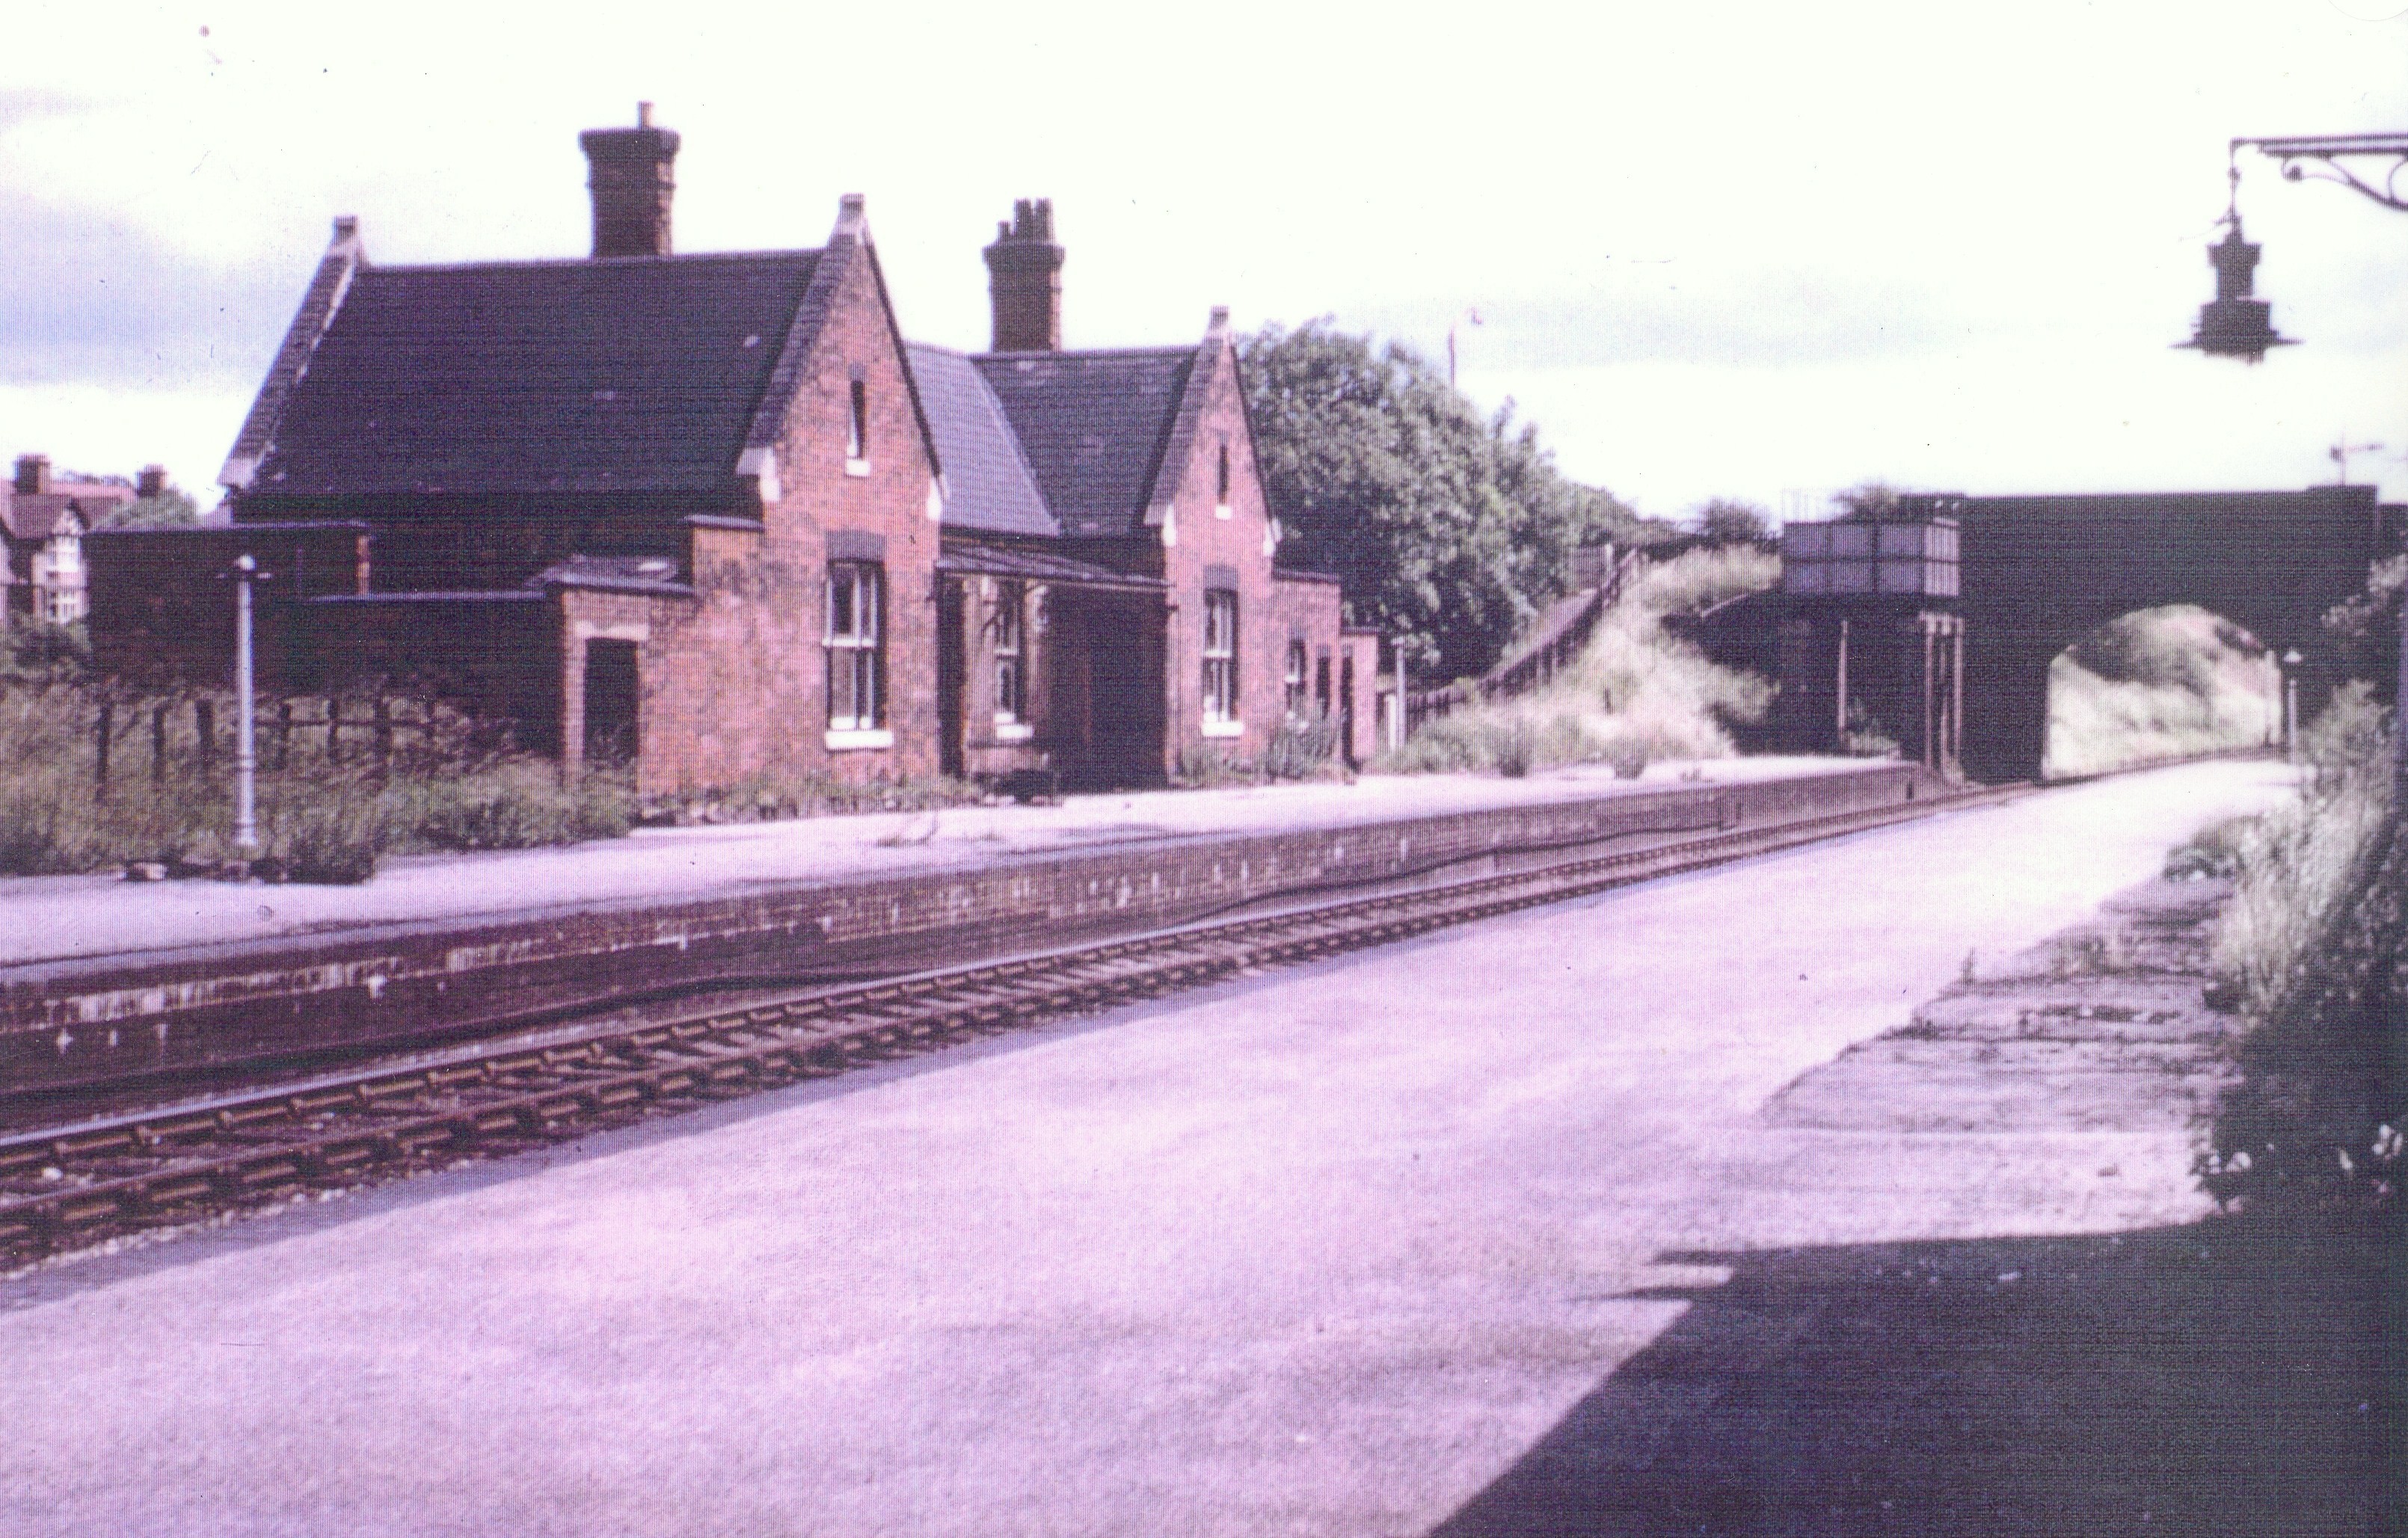 This view probably after the closure of the Station in January 1965